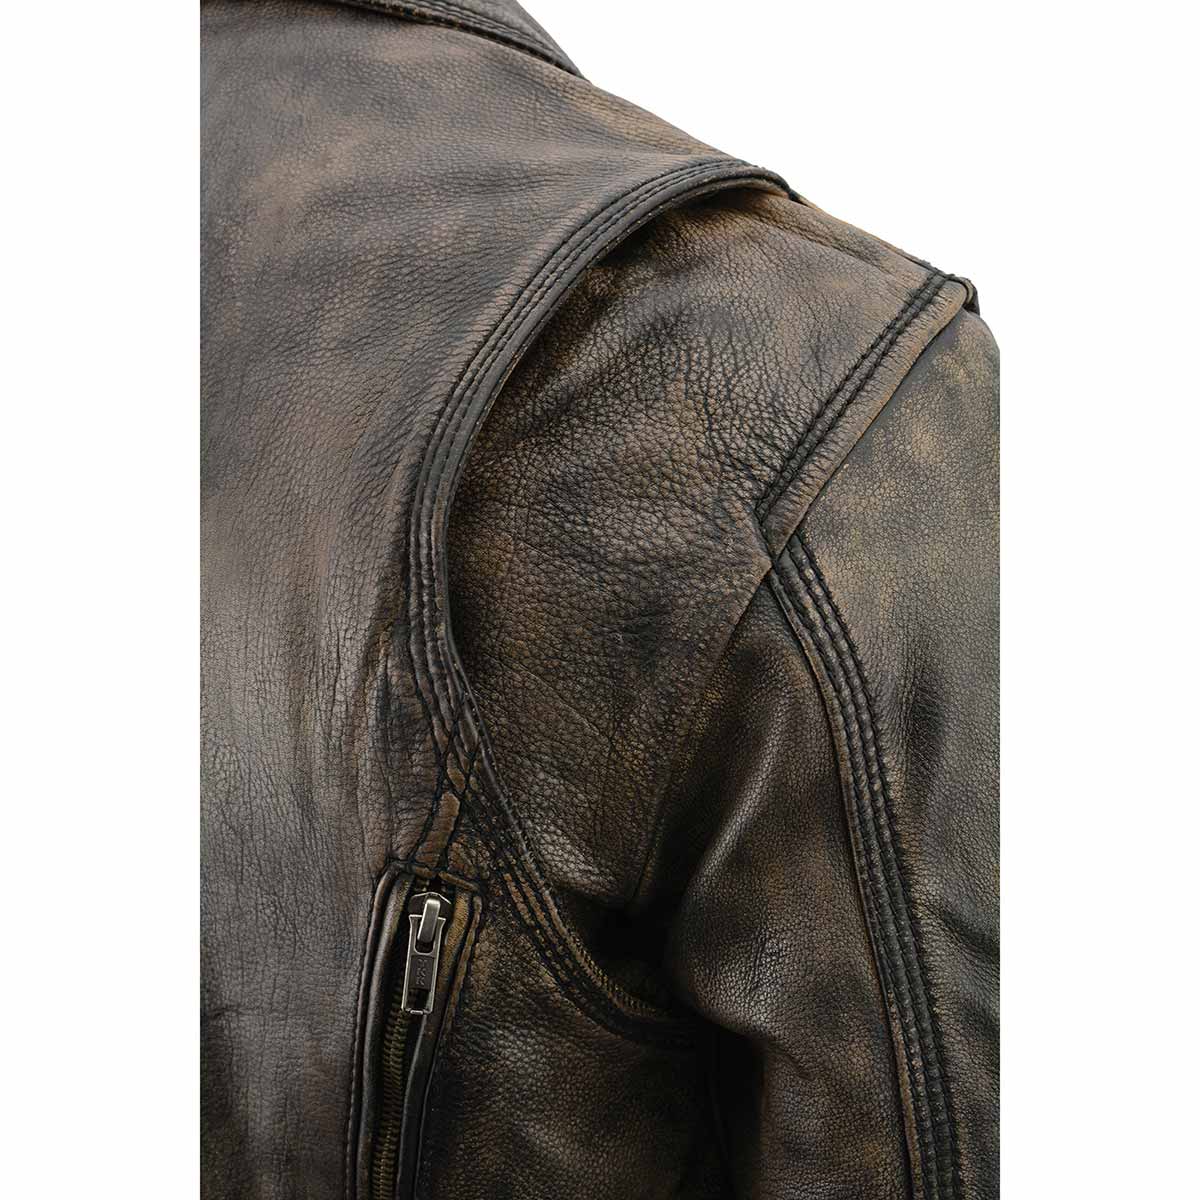 Milwaukee Leather MLM1515 Men's Distressed Brown 'Triple Stitched' Beltless Motorcycle Leather Jacket